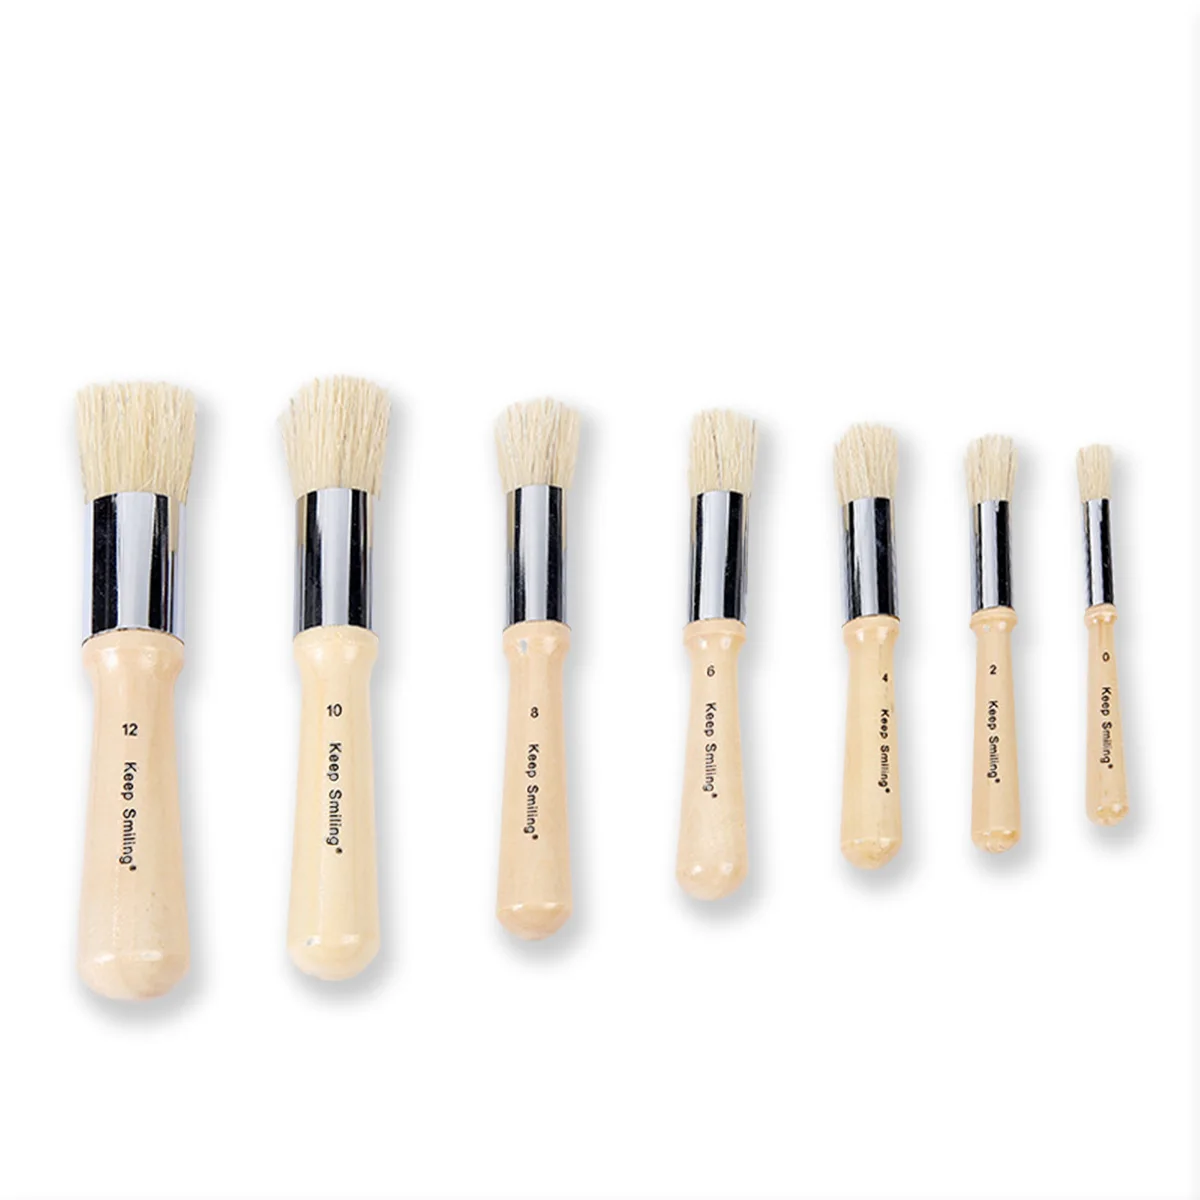 TOYMIS 6Pcs Wooden Stencil Brushes Card Making 3 Sizes Watercolor Painting Oil Painting Natural Bristle Stencil Brushes for Acrylic Painting DIY Art Crafts Project 